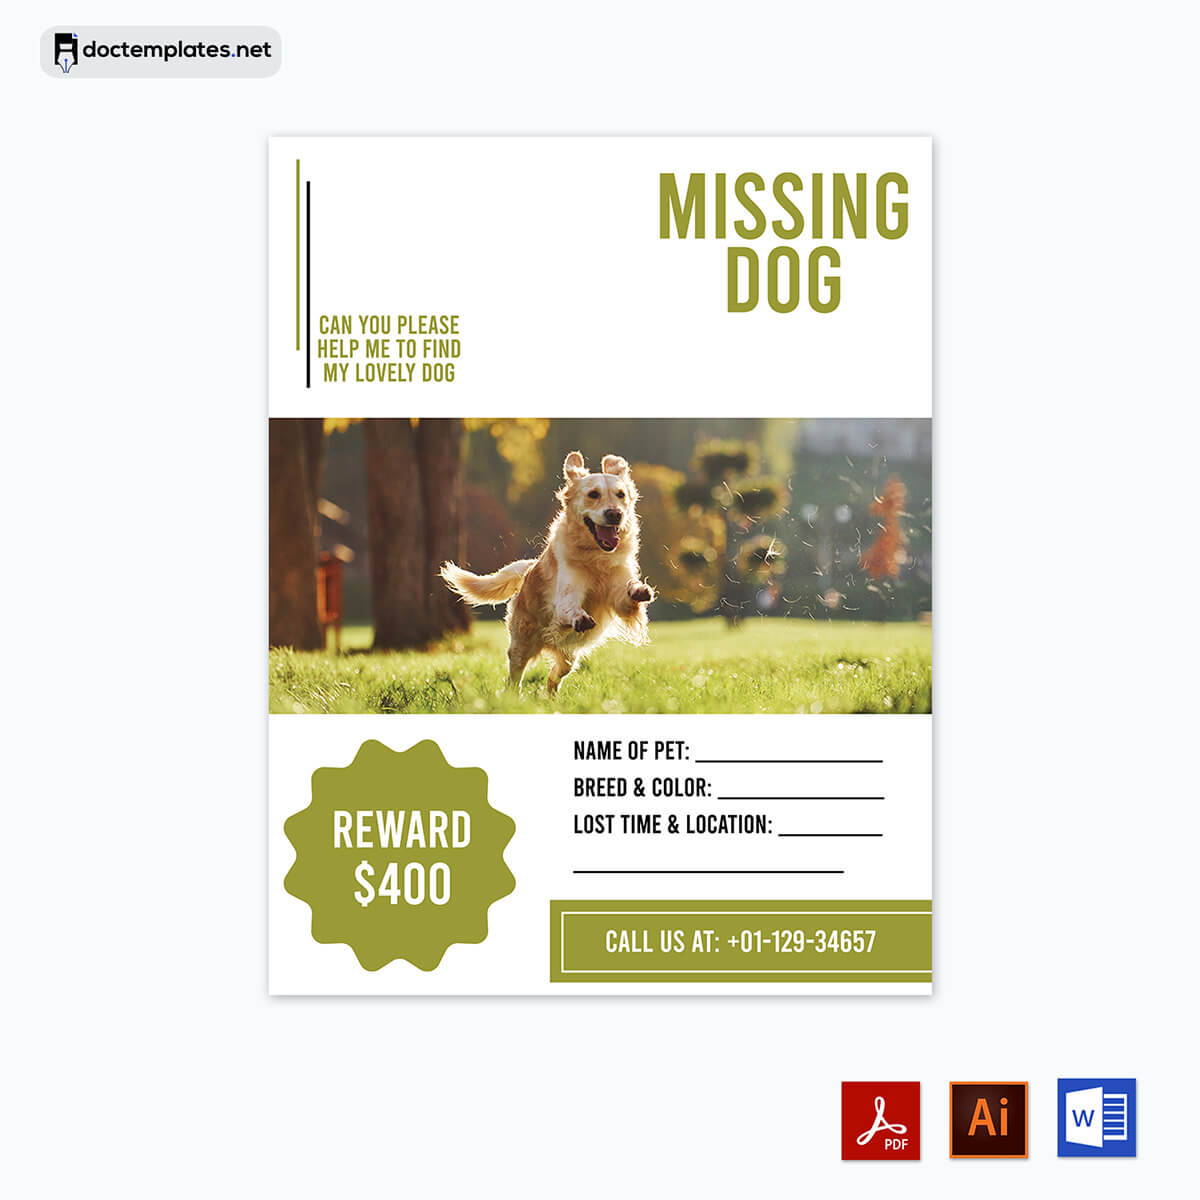 "Missing Cat-Dog Alert Flyer" - Spread the word about your missing pets with this alert flyer template.